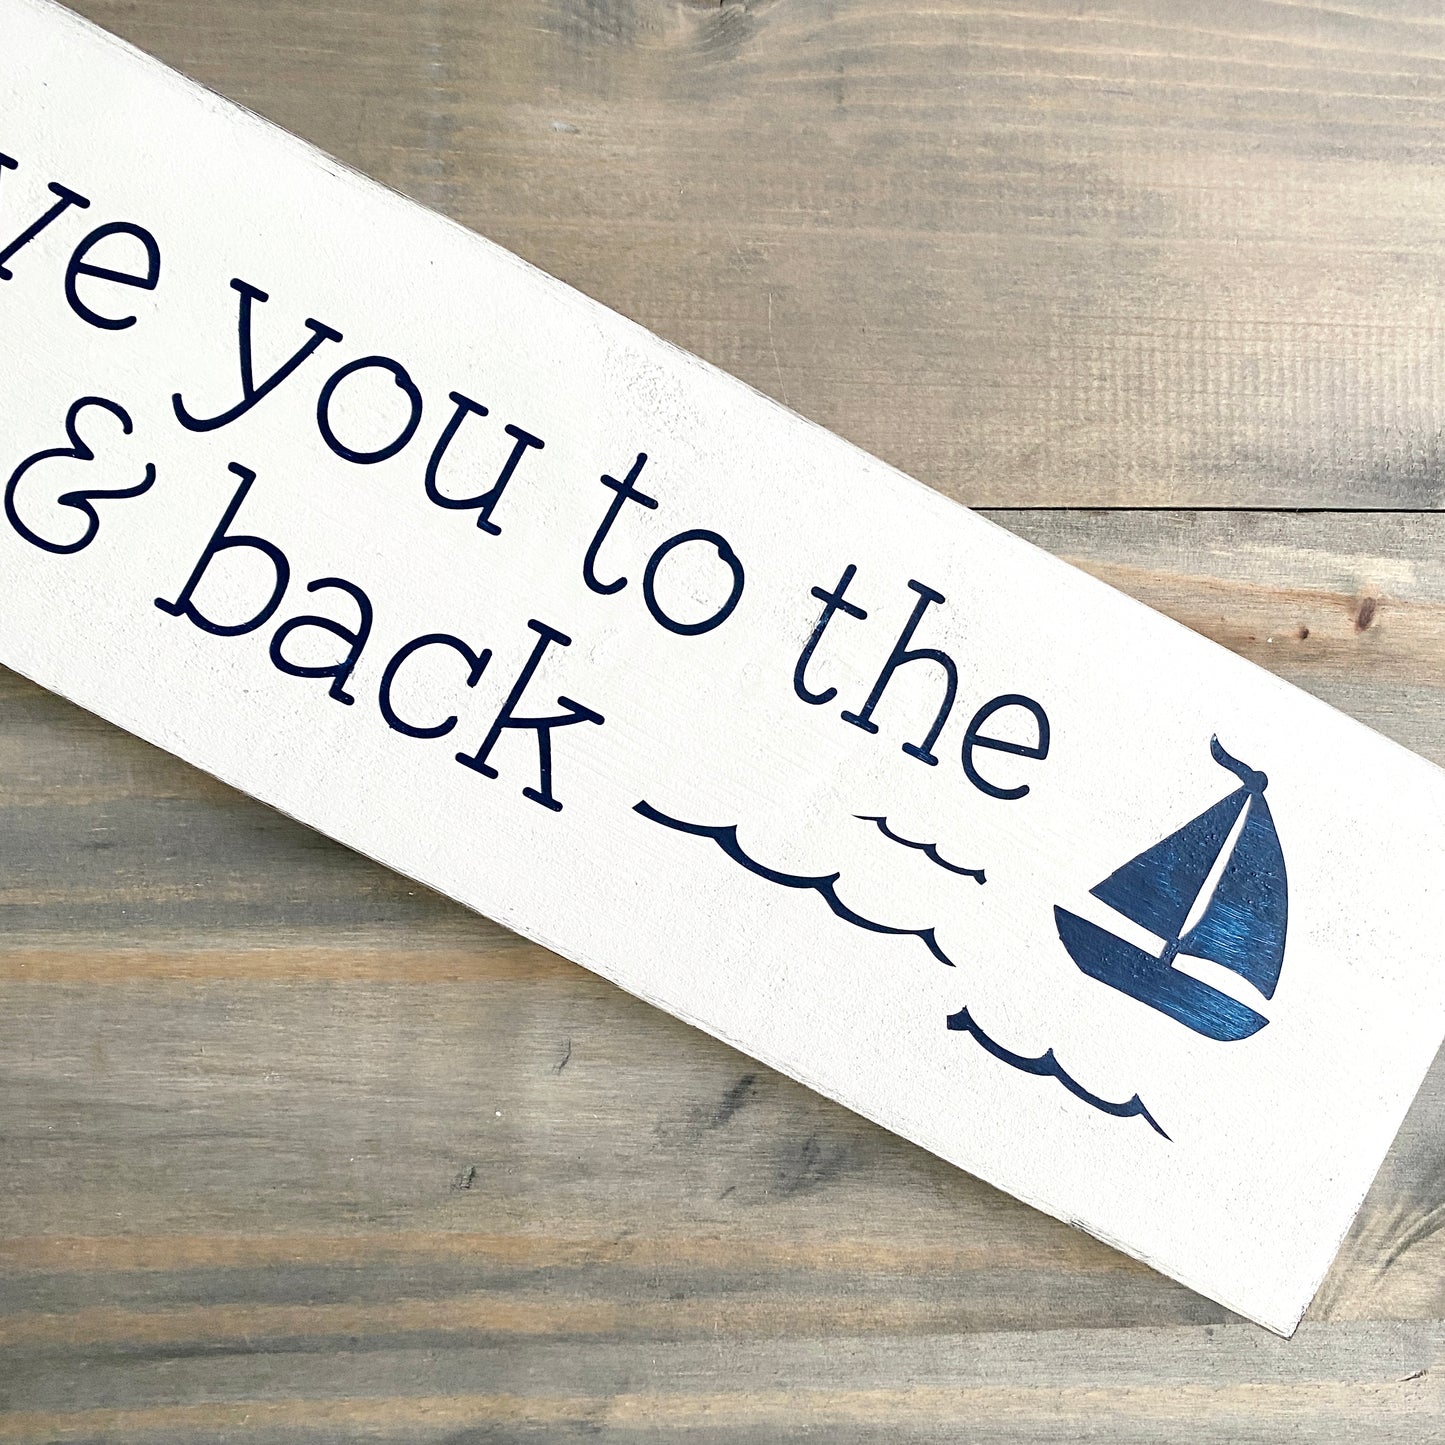 I Love You to the Lake and Back Sign